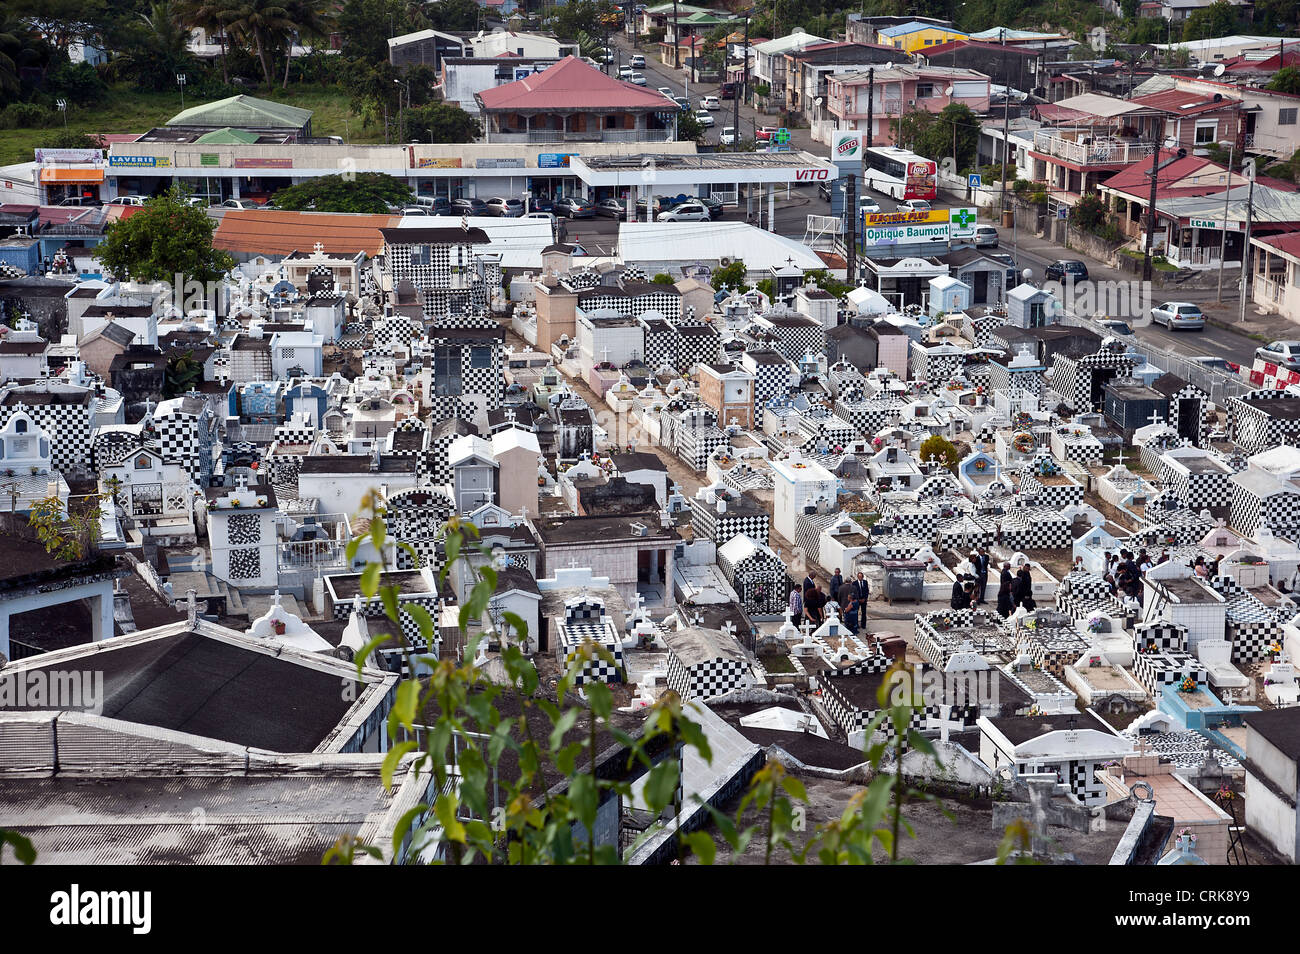 Caribbean cemetery cimetiere French Guadeloupe Morne a l'eau Stock Photo